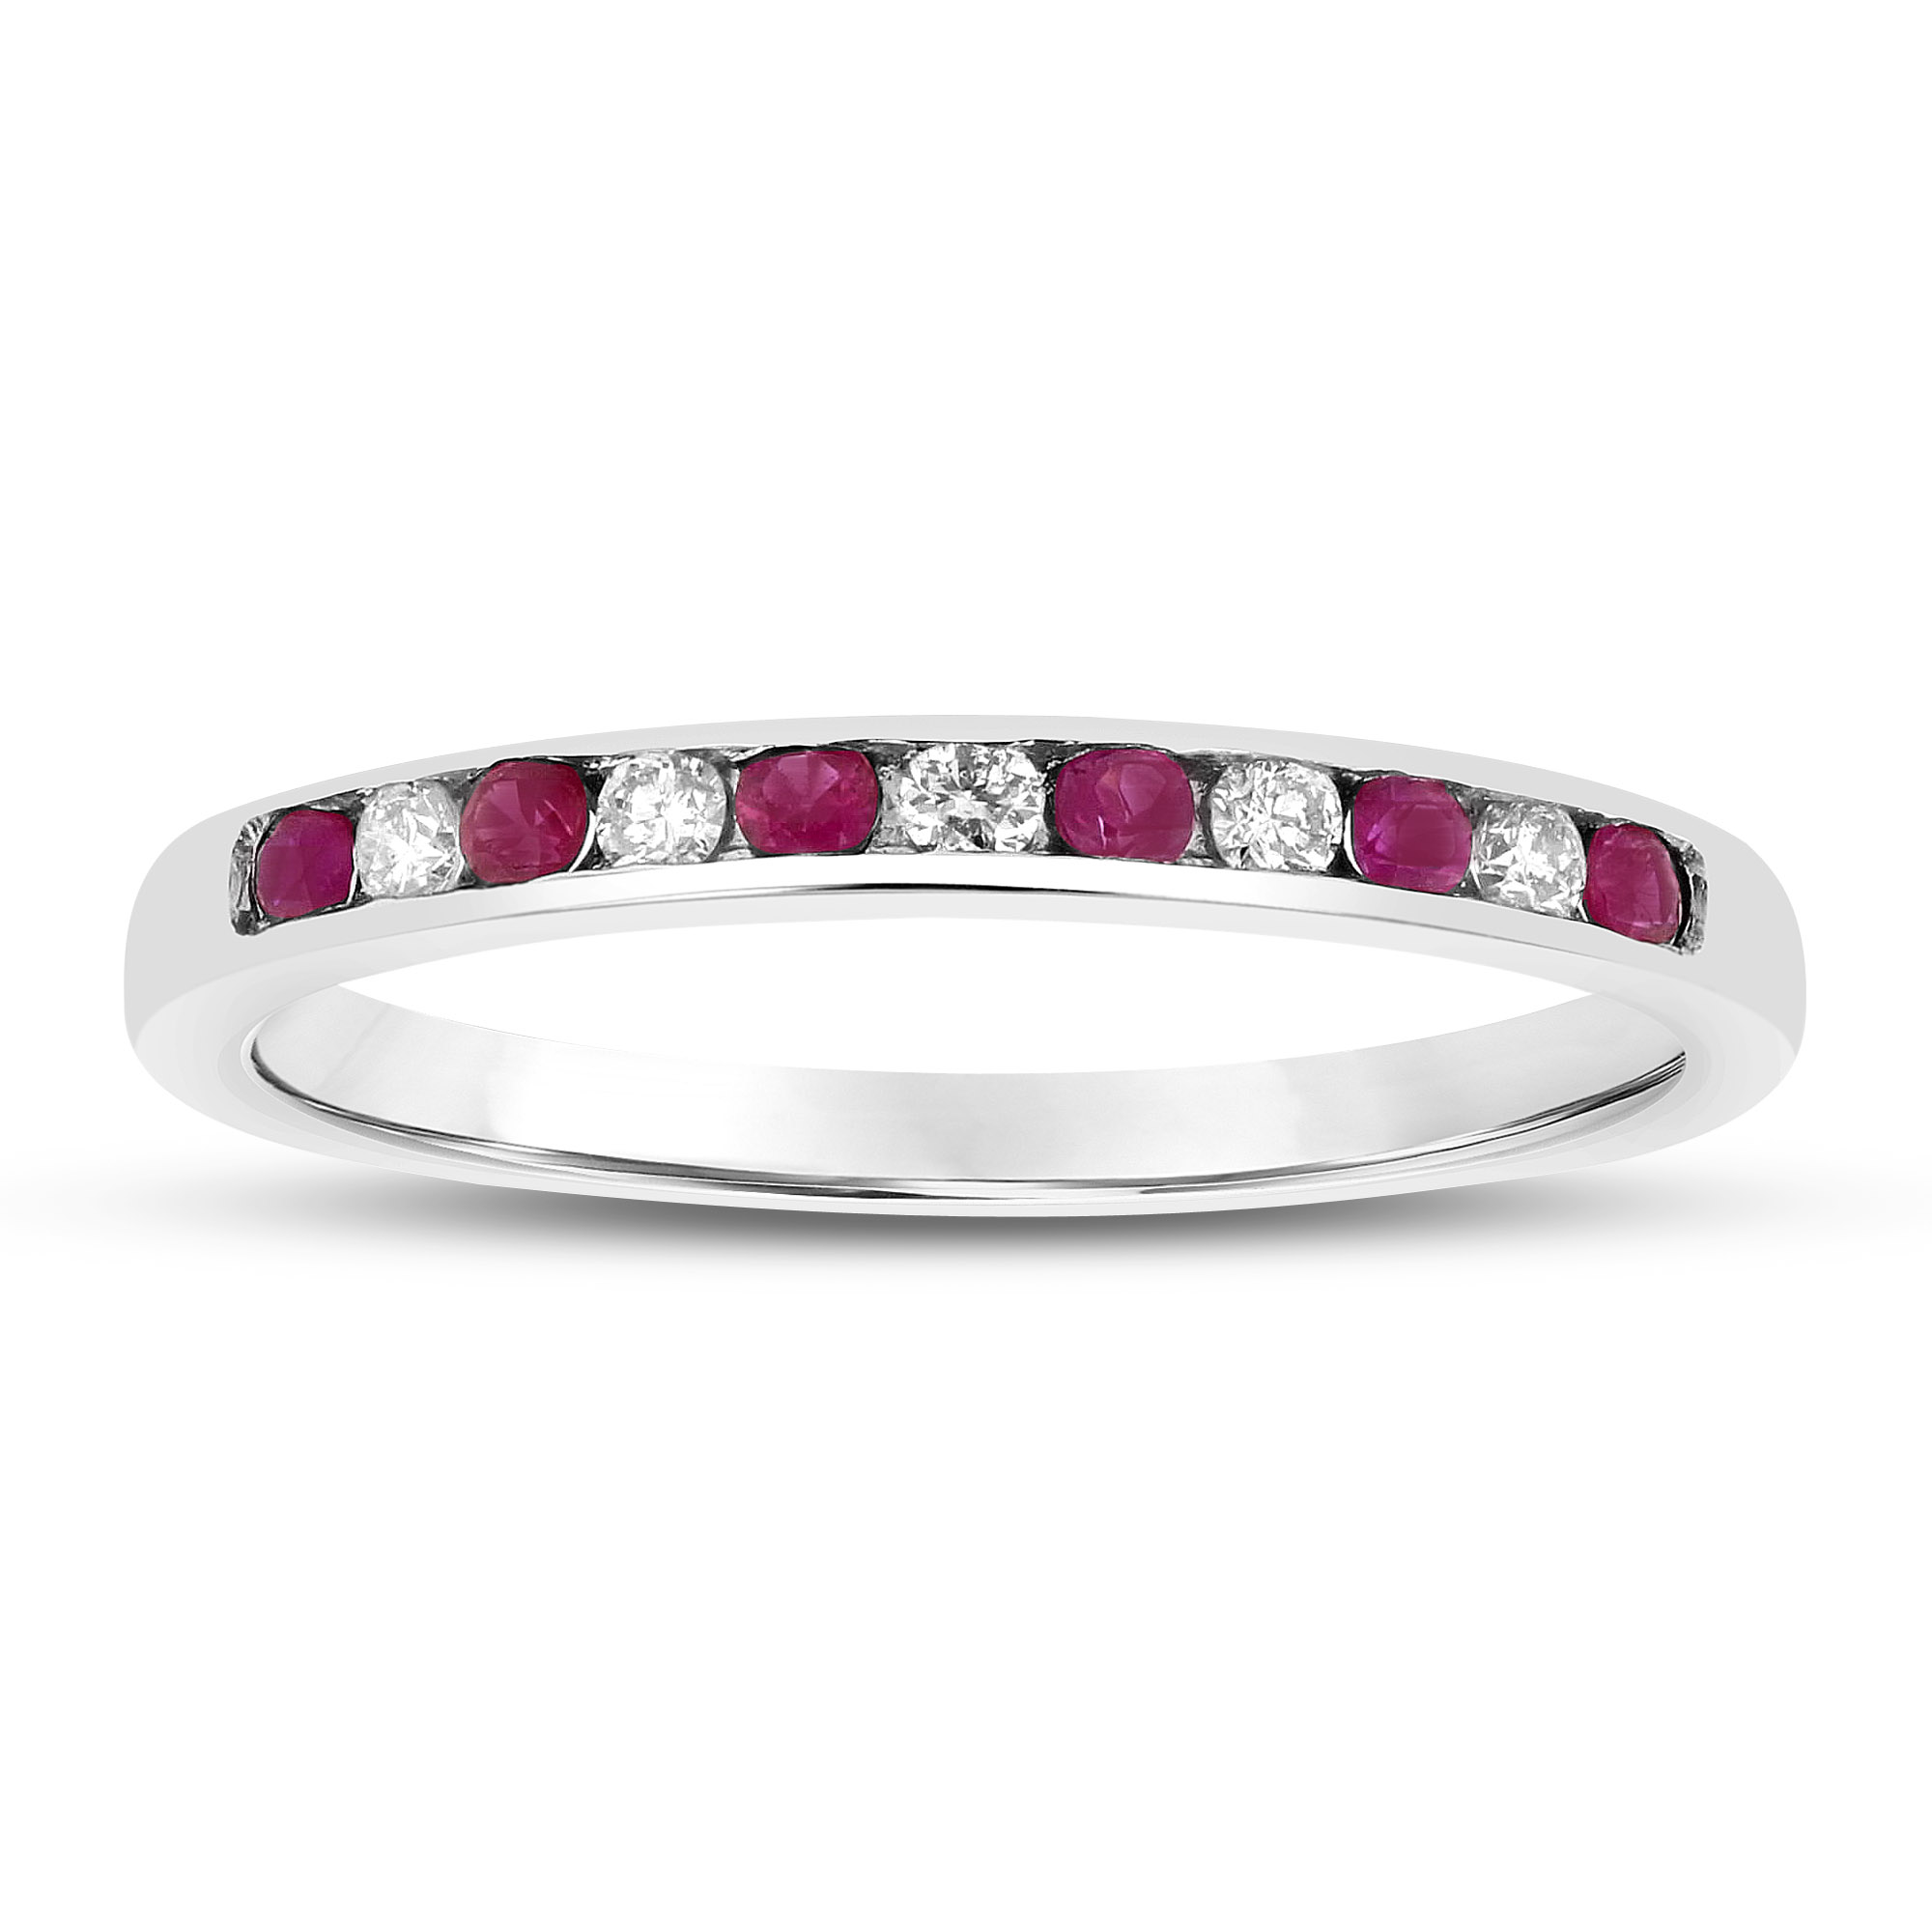 View 0.25ctw Diamond and Ruby Band in 14k Gold